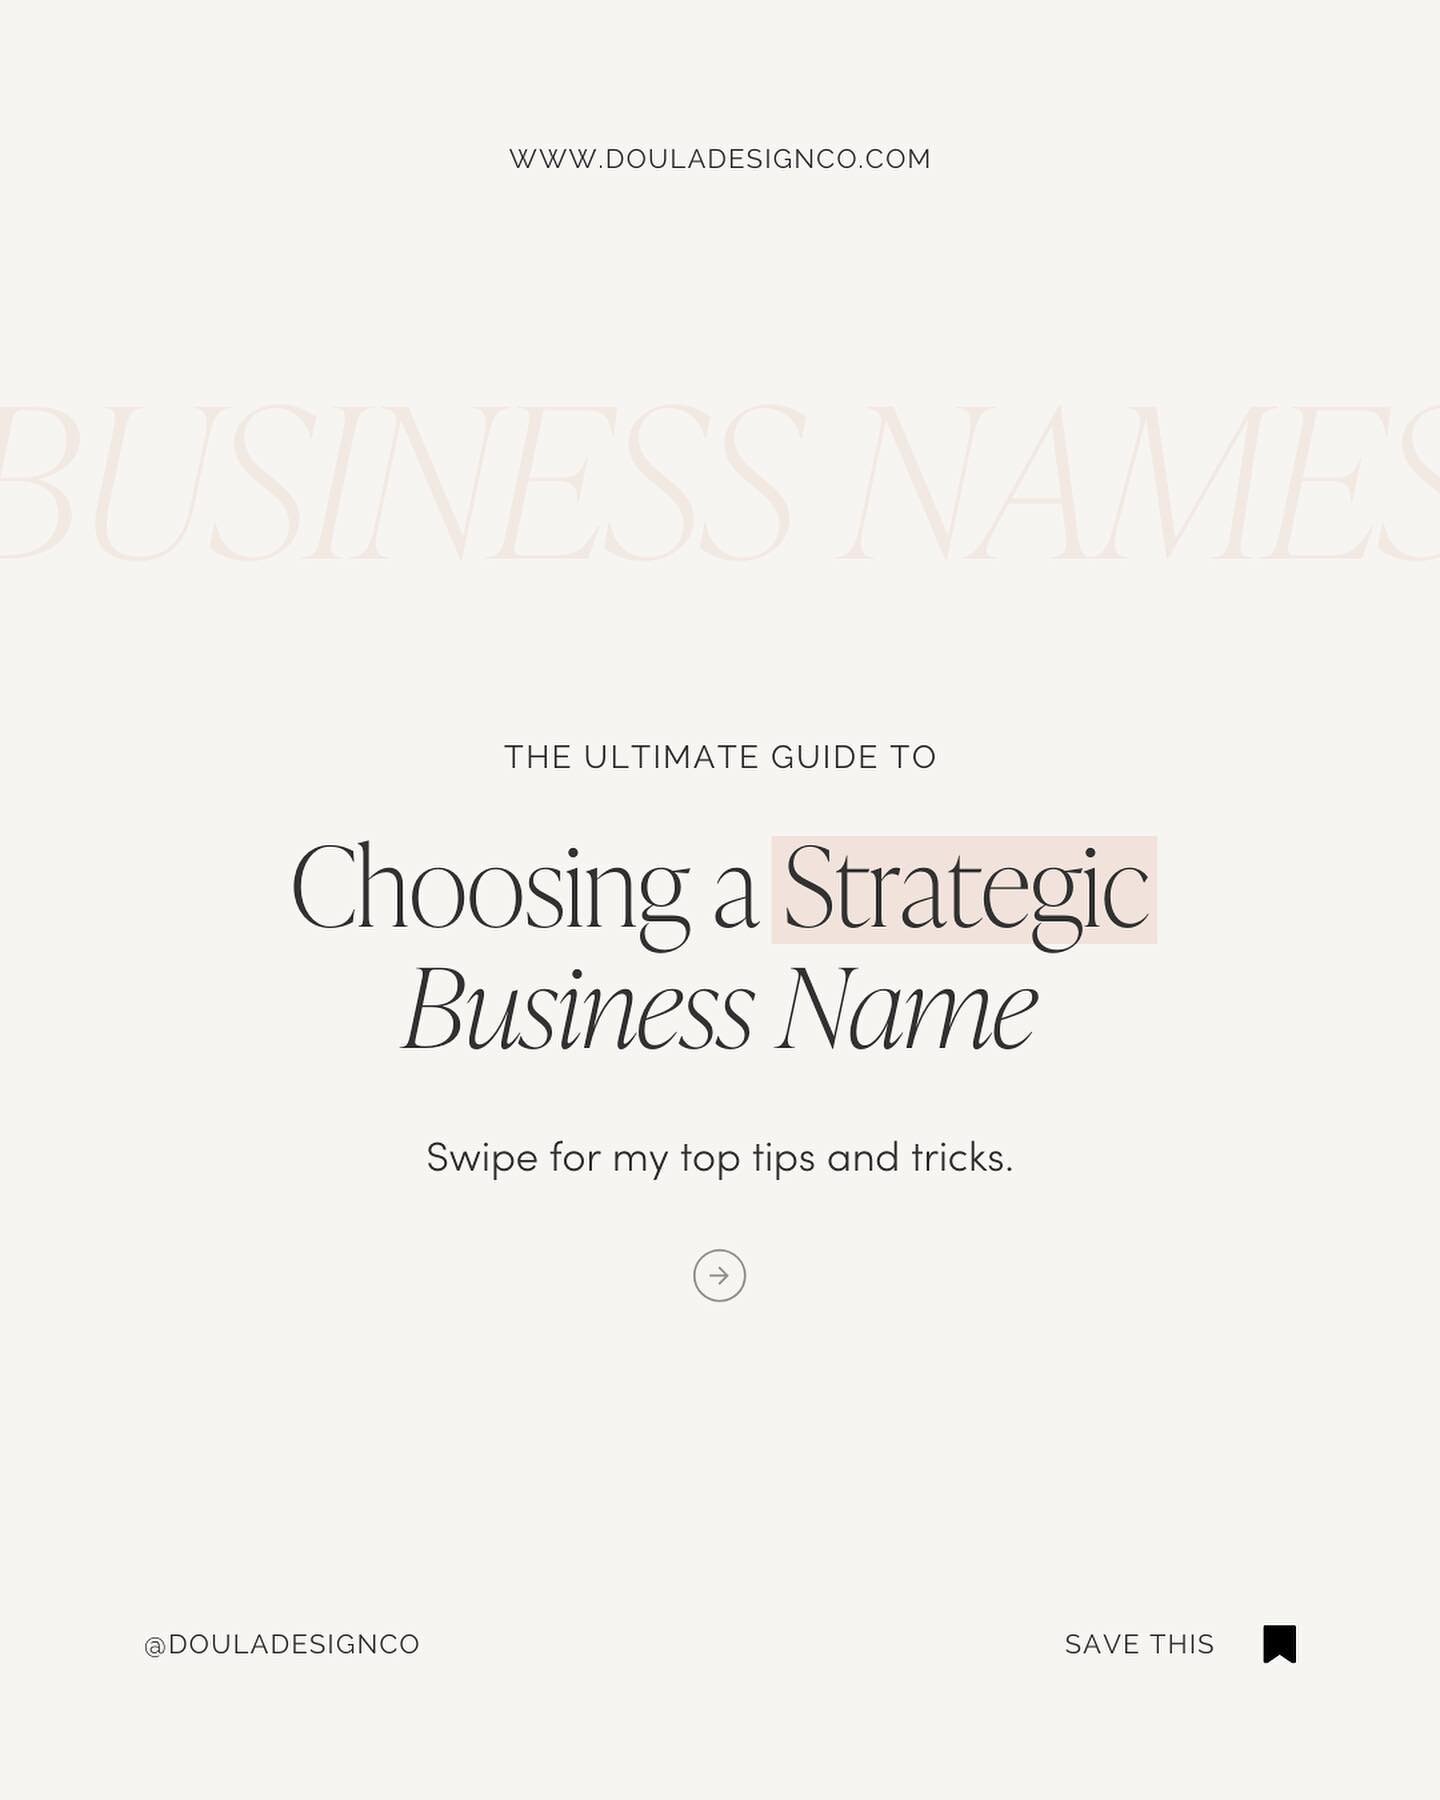 Need help naming your doula business? 👋🏻 Here are my top tips for choosing the perfect name:

Step 1️⃣: Get Creative - Dive deep into the values that define your doula practice. Infuse your business name with elements that align with your philosoph